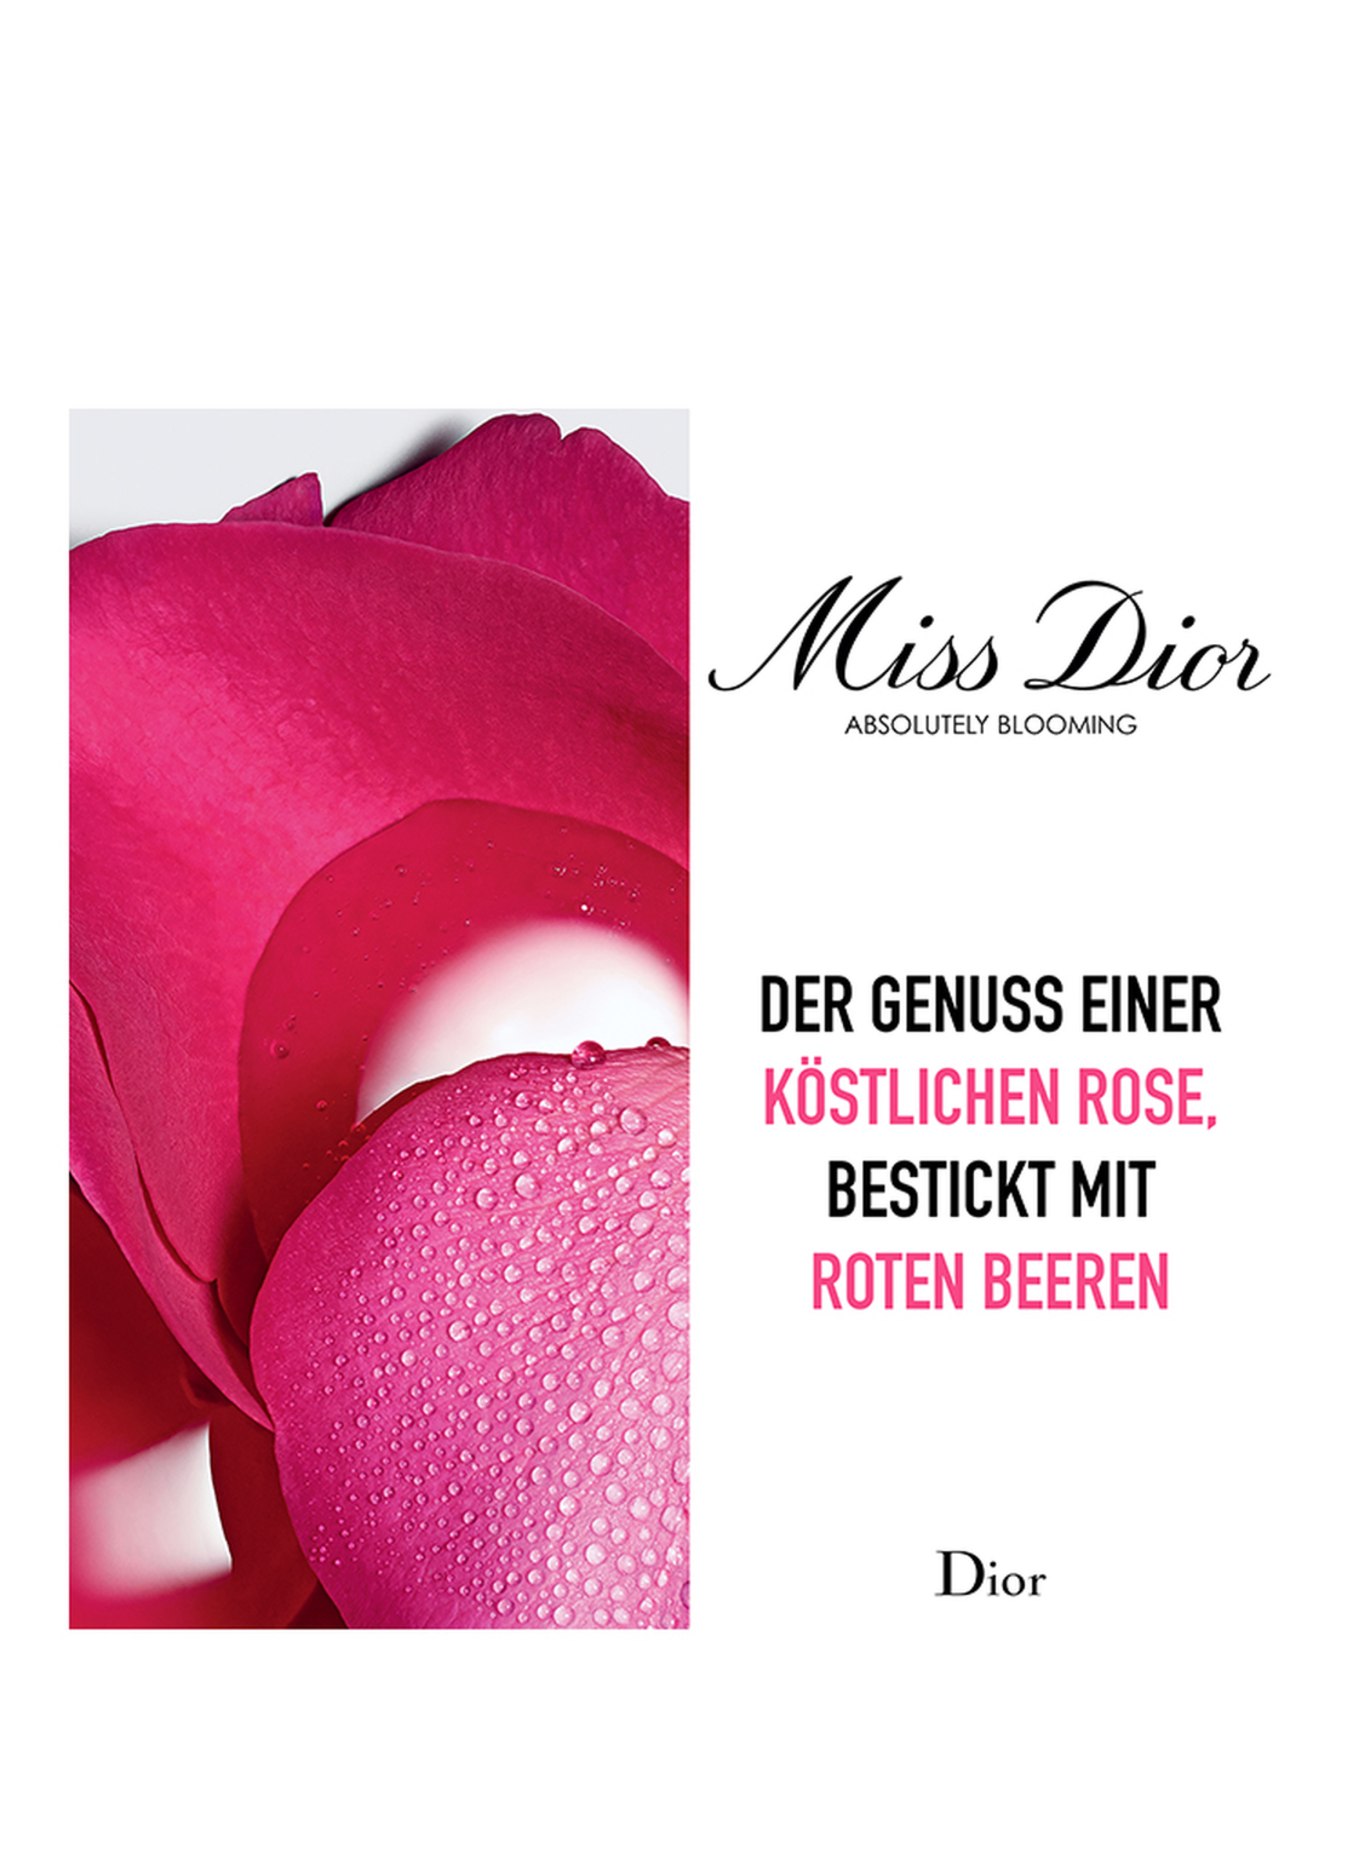 DIOR MISS DIOR ABSOLUTELY BLOOMING (Bild 3)